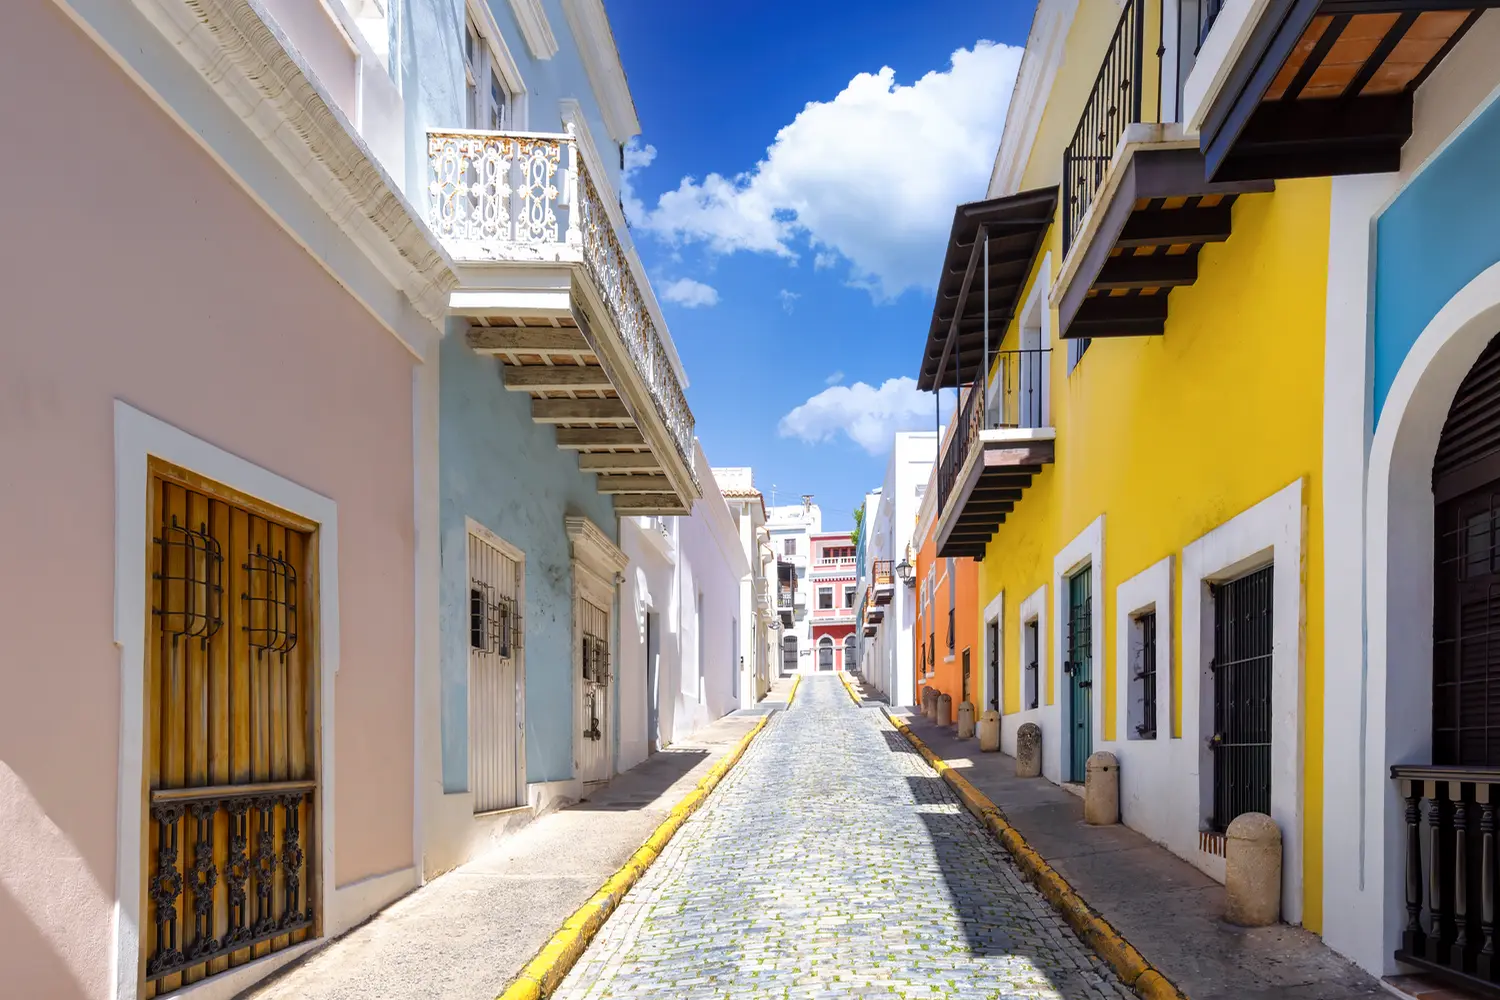 San Juan's colorful colonial architecture in historic city center.